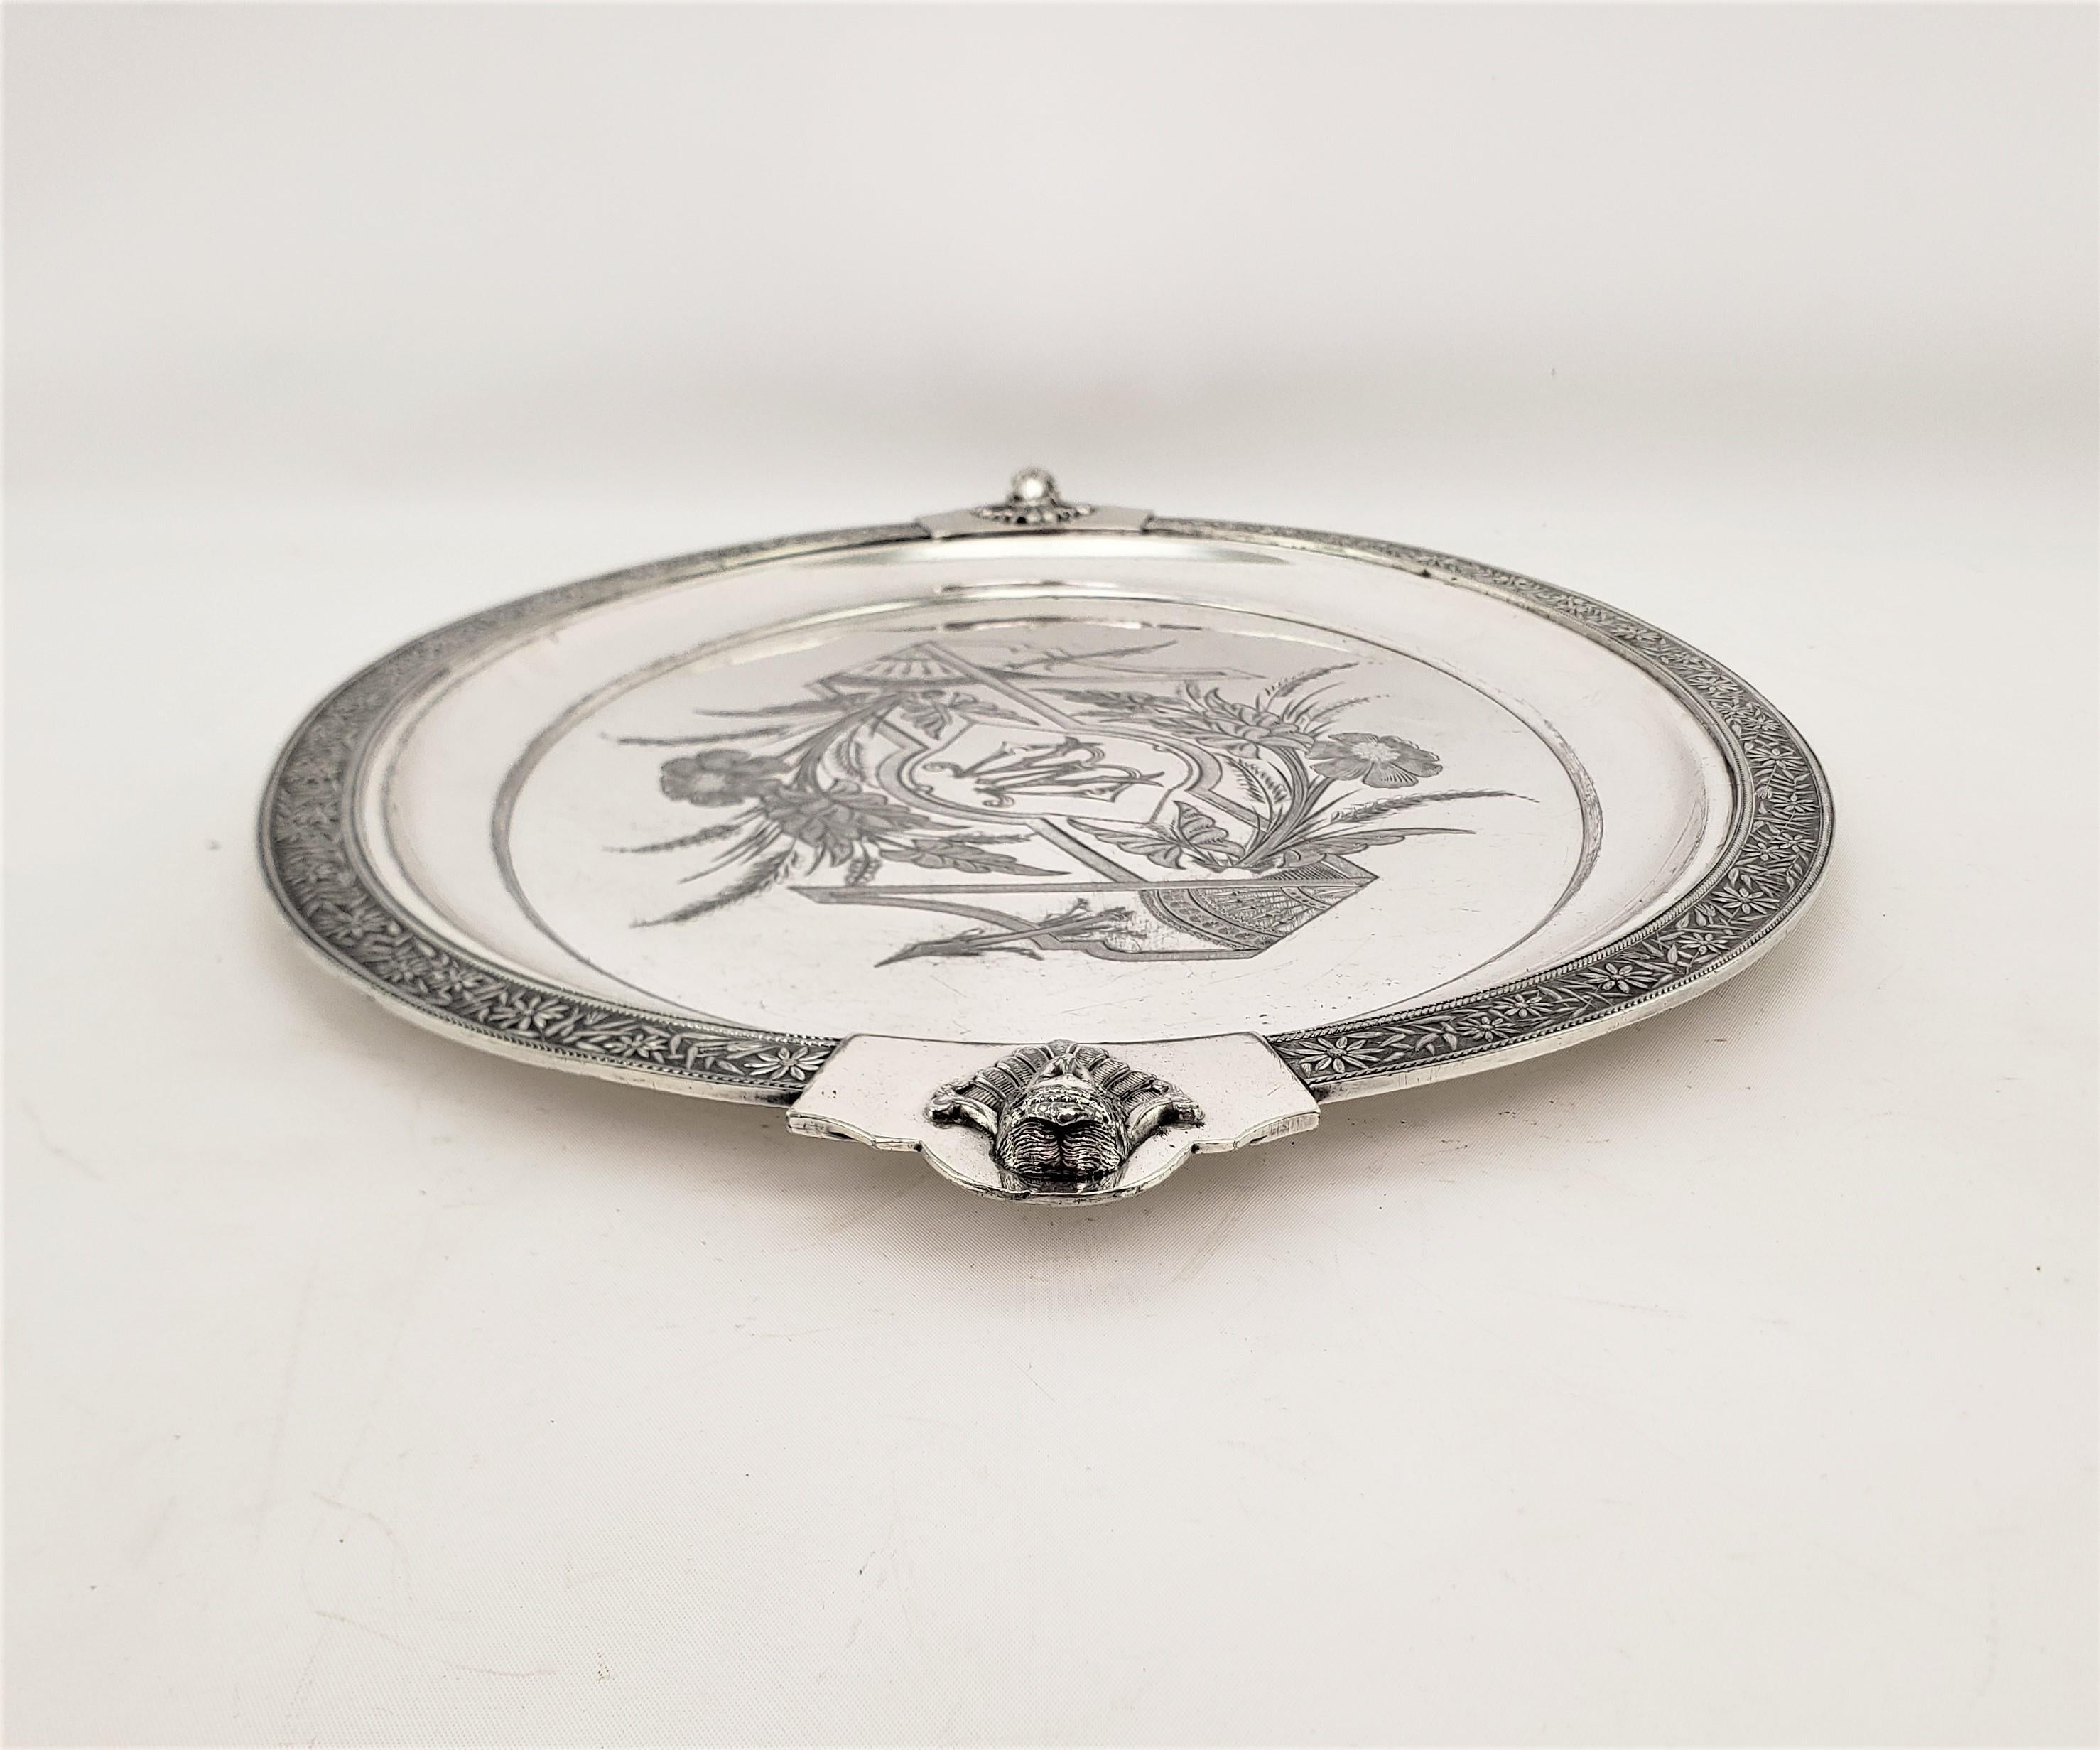 Antique English Silver Plated Serving Tray with Neoclassical Styled Decoration For Sale 4